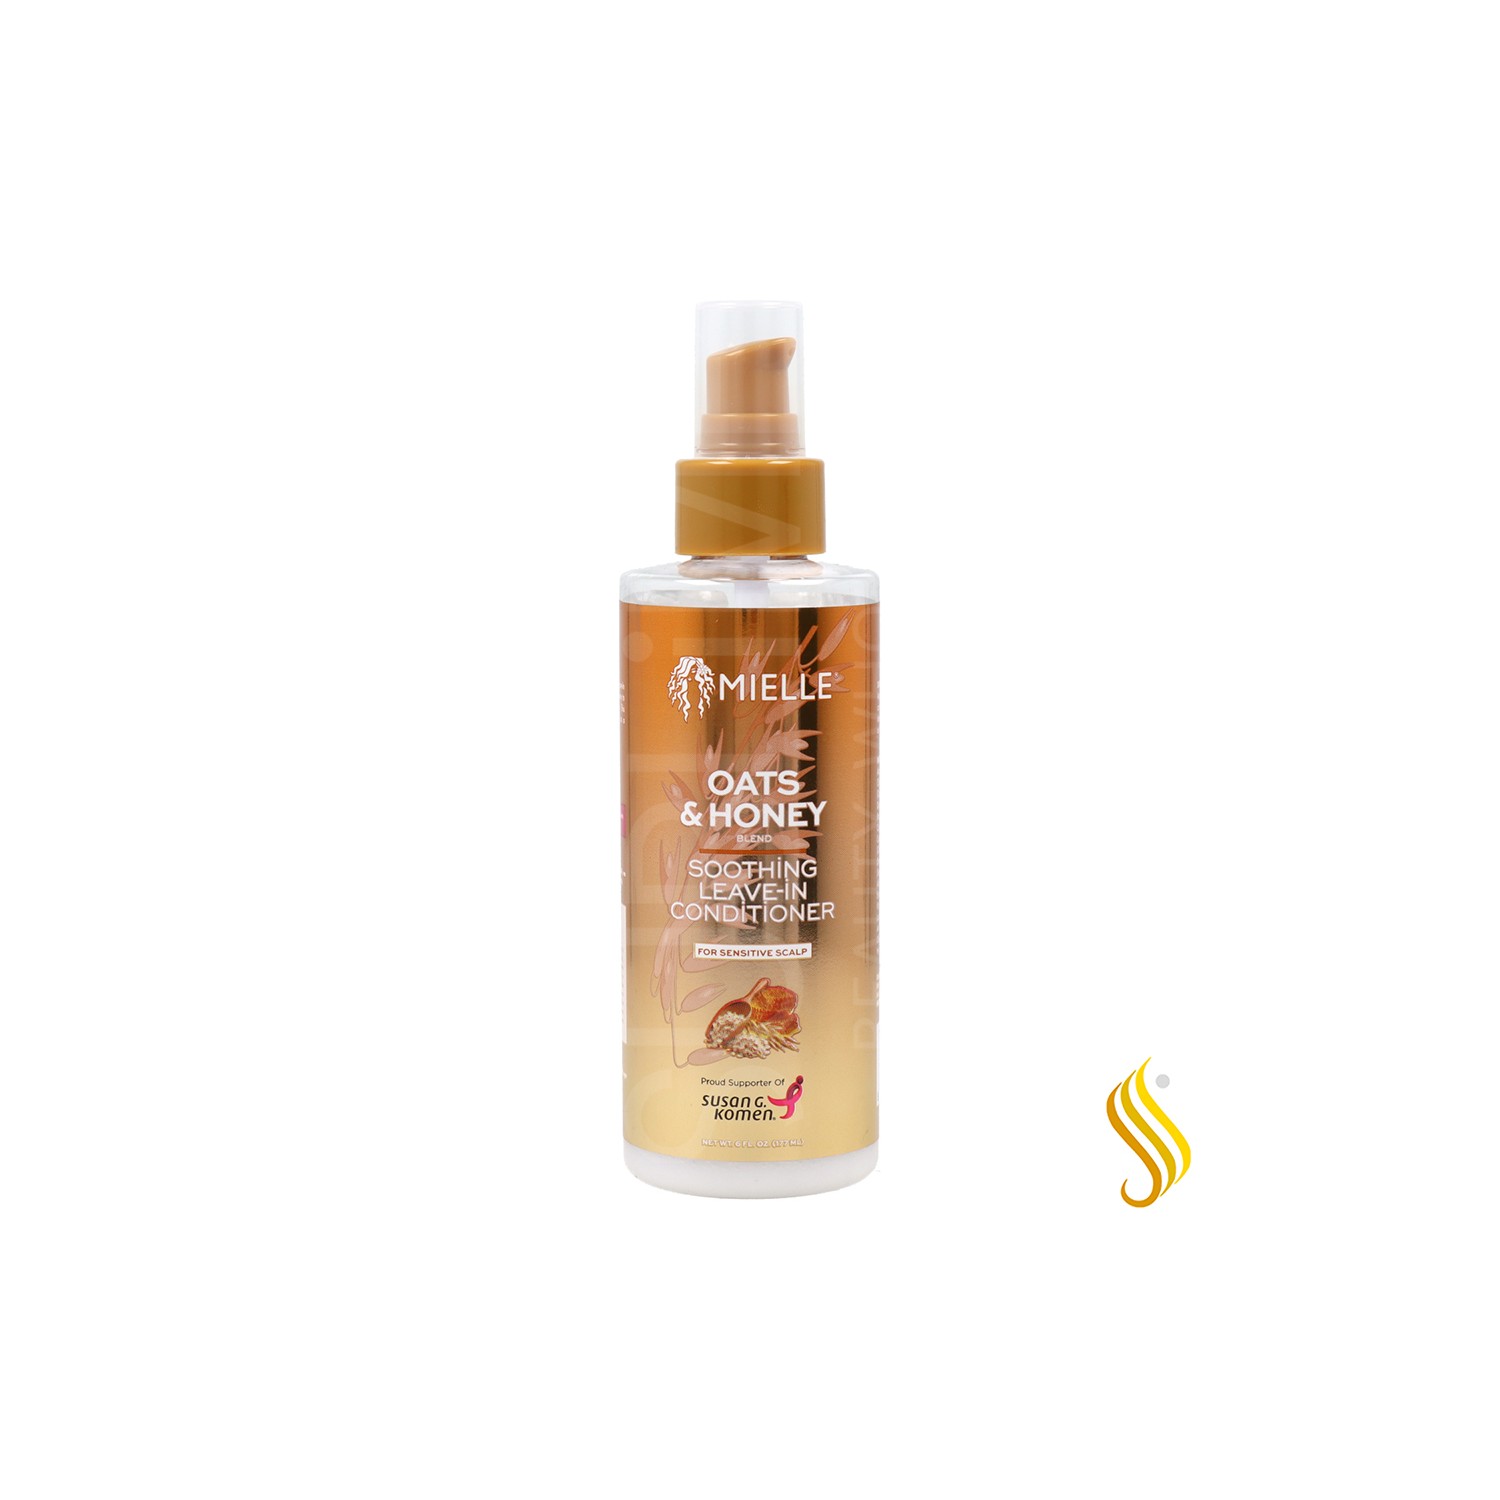 Mielle Oats Honey Soothing Leave In Conditioner 177ml